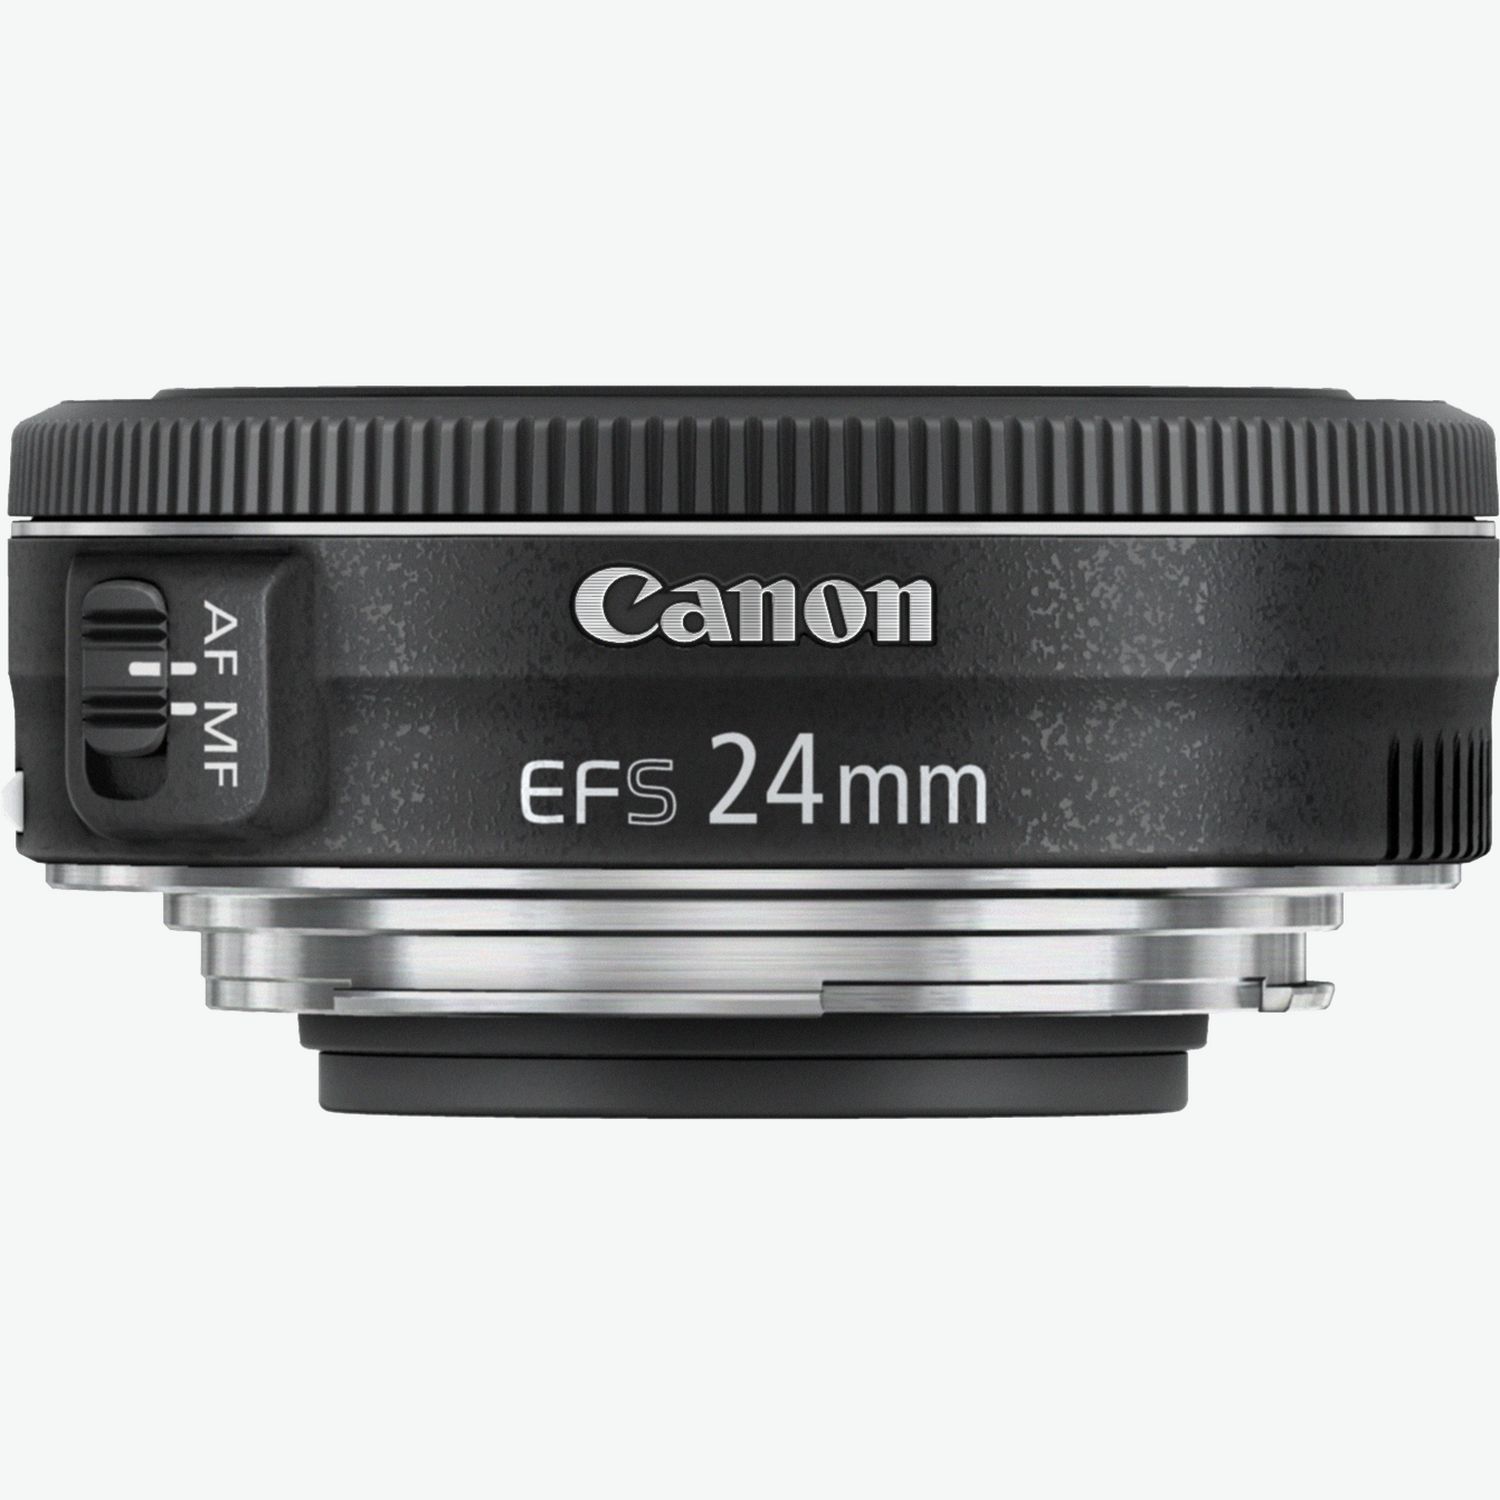 Canon EF-S 24mm f/2.8 STM Lens - Cameras & photography